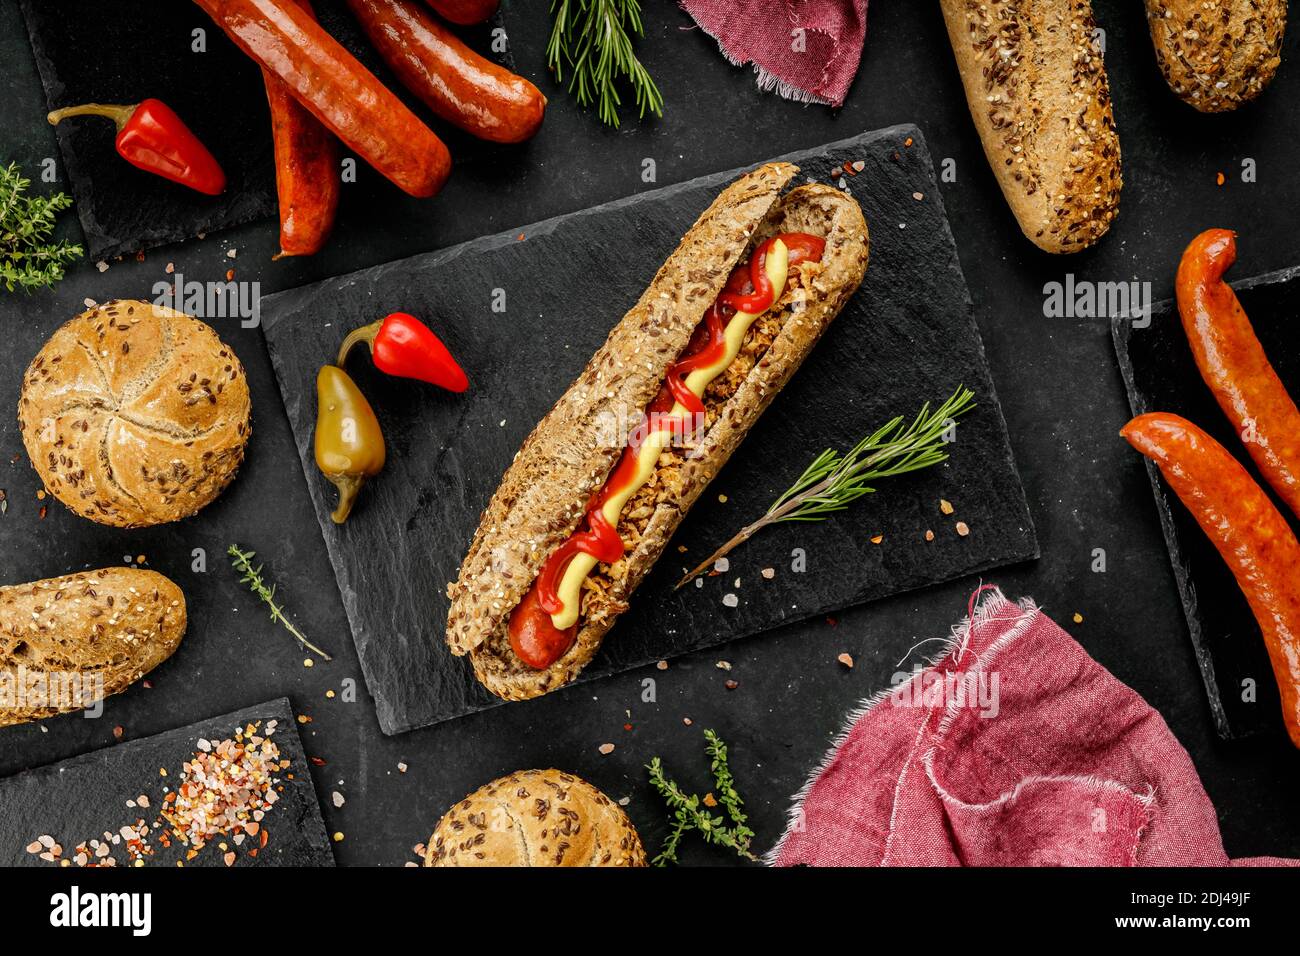 Flat lay composition of delicious hot dogs and sandwiches with different toppings on the dark background Stock Photo